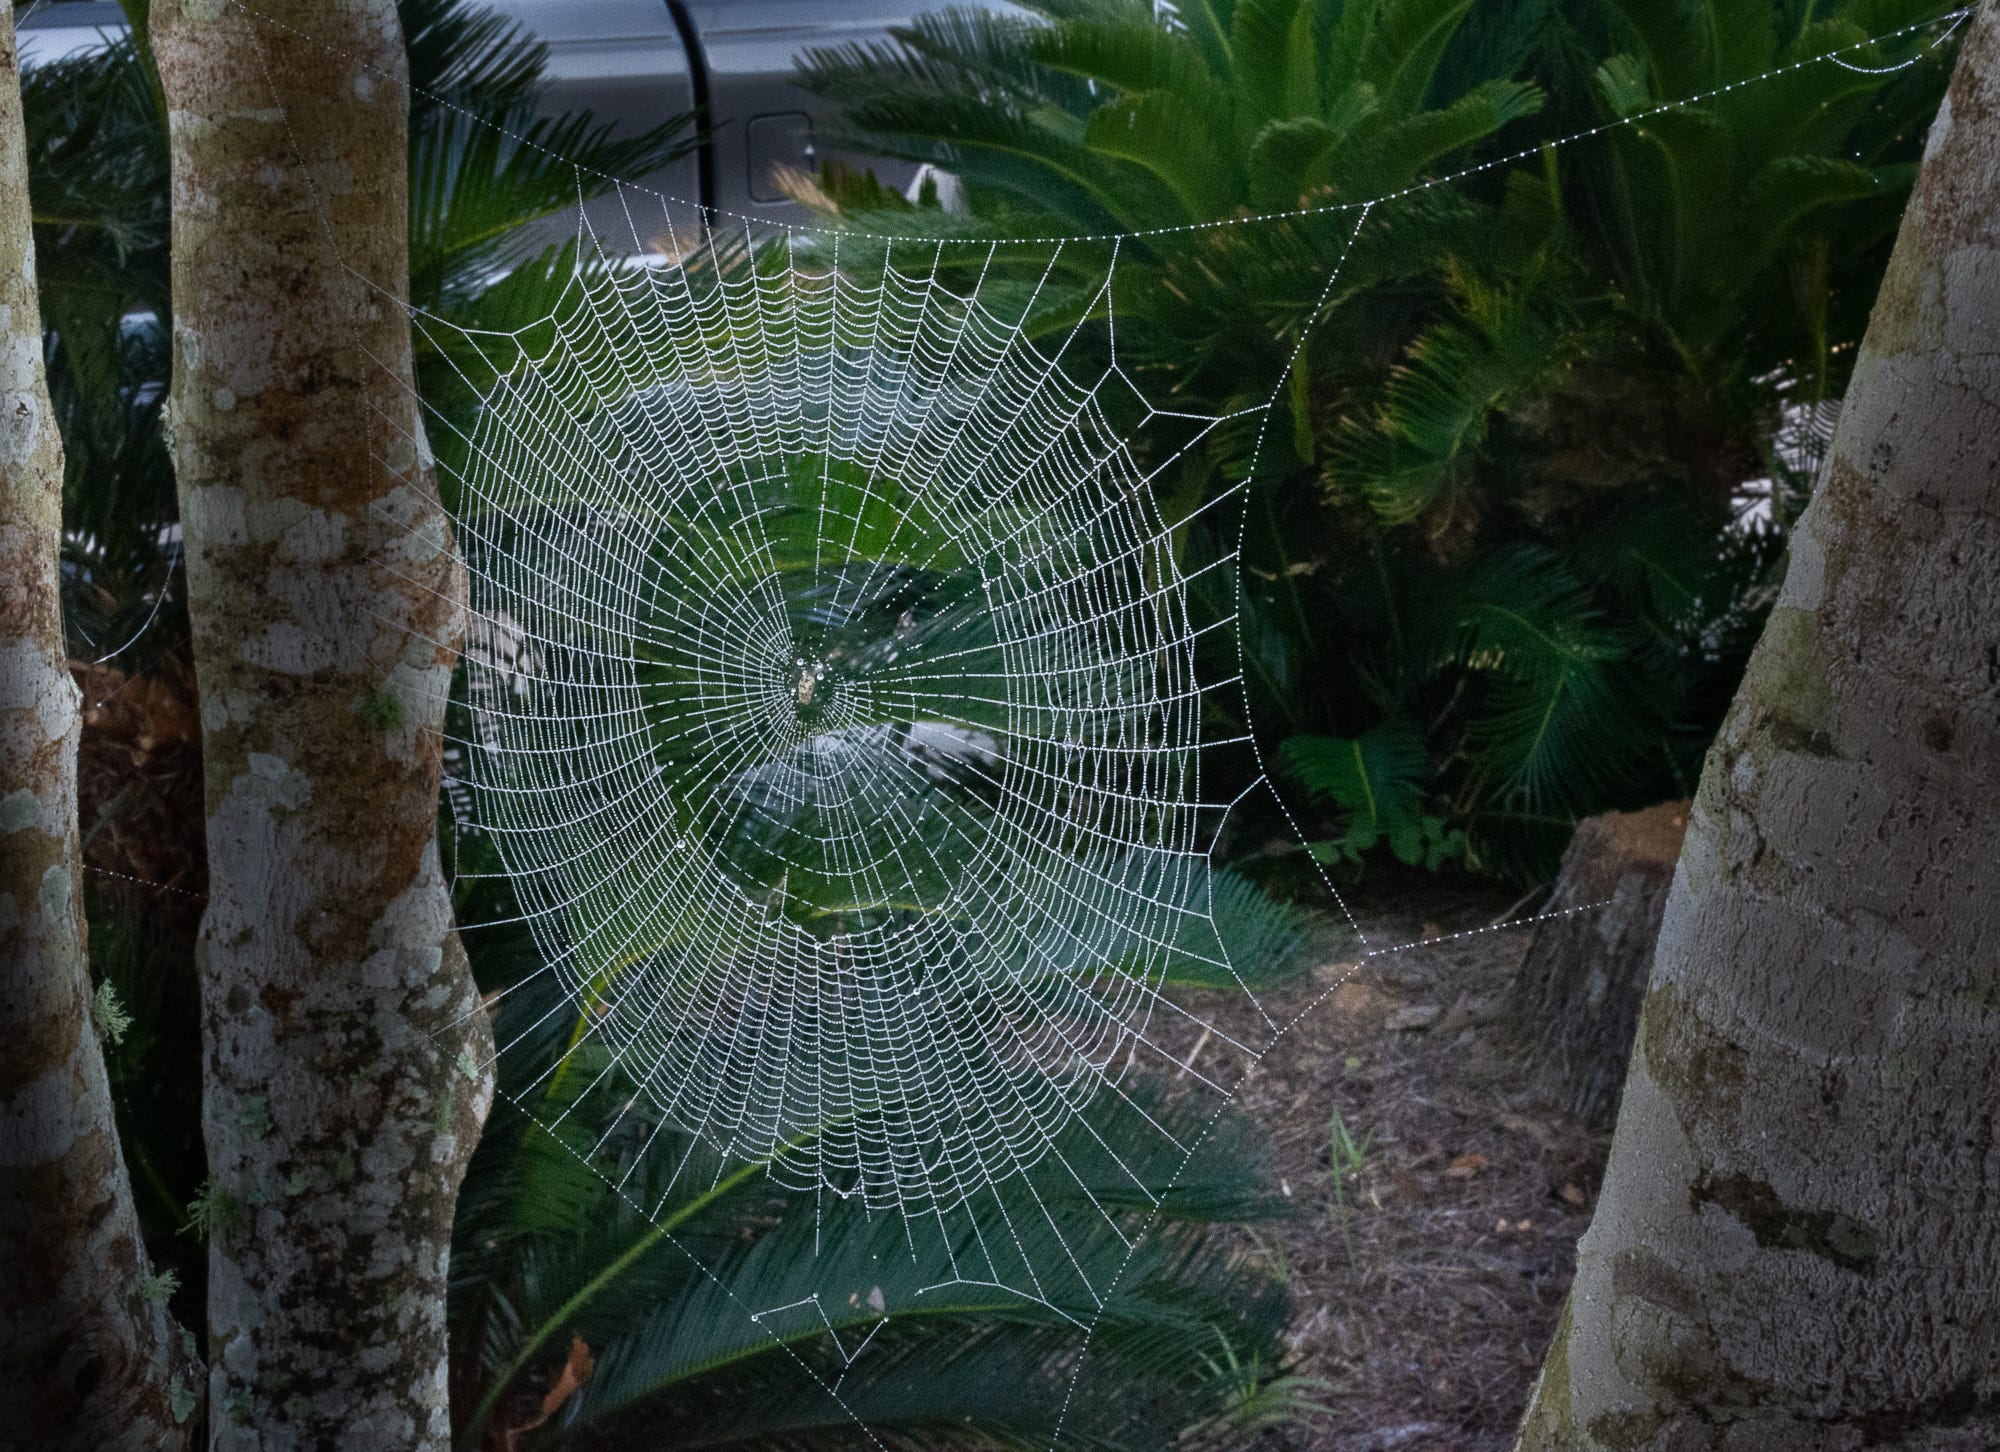 a full spider web strung between two tree branches with a small spider sitting in the middle and sego palms in the background